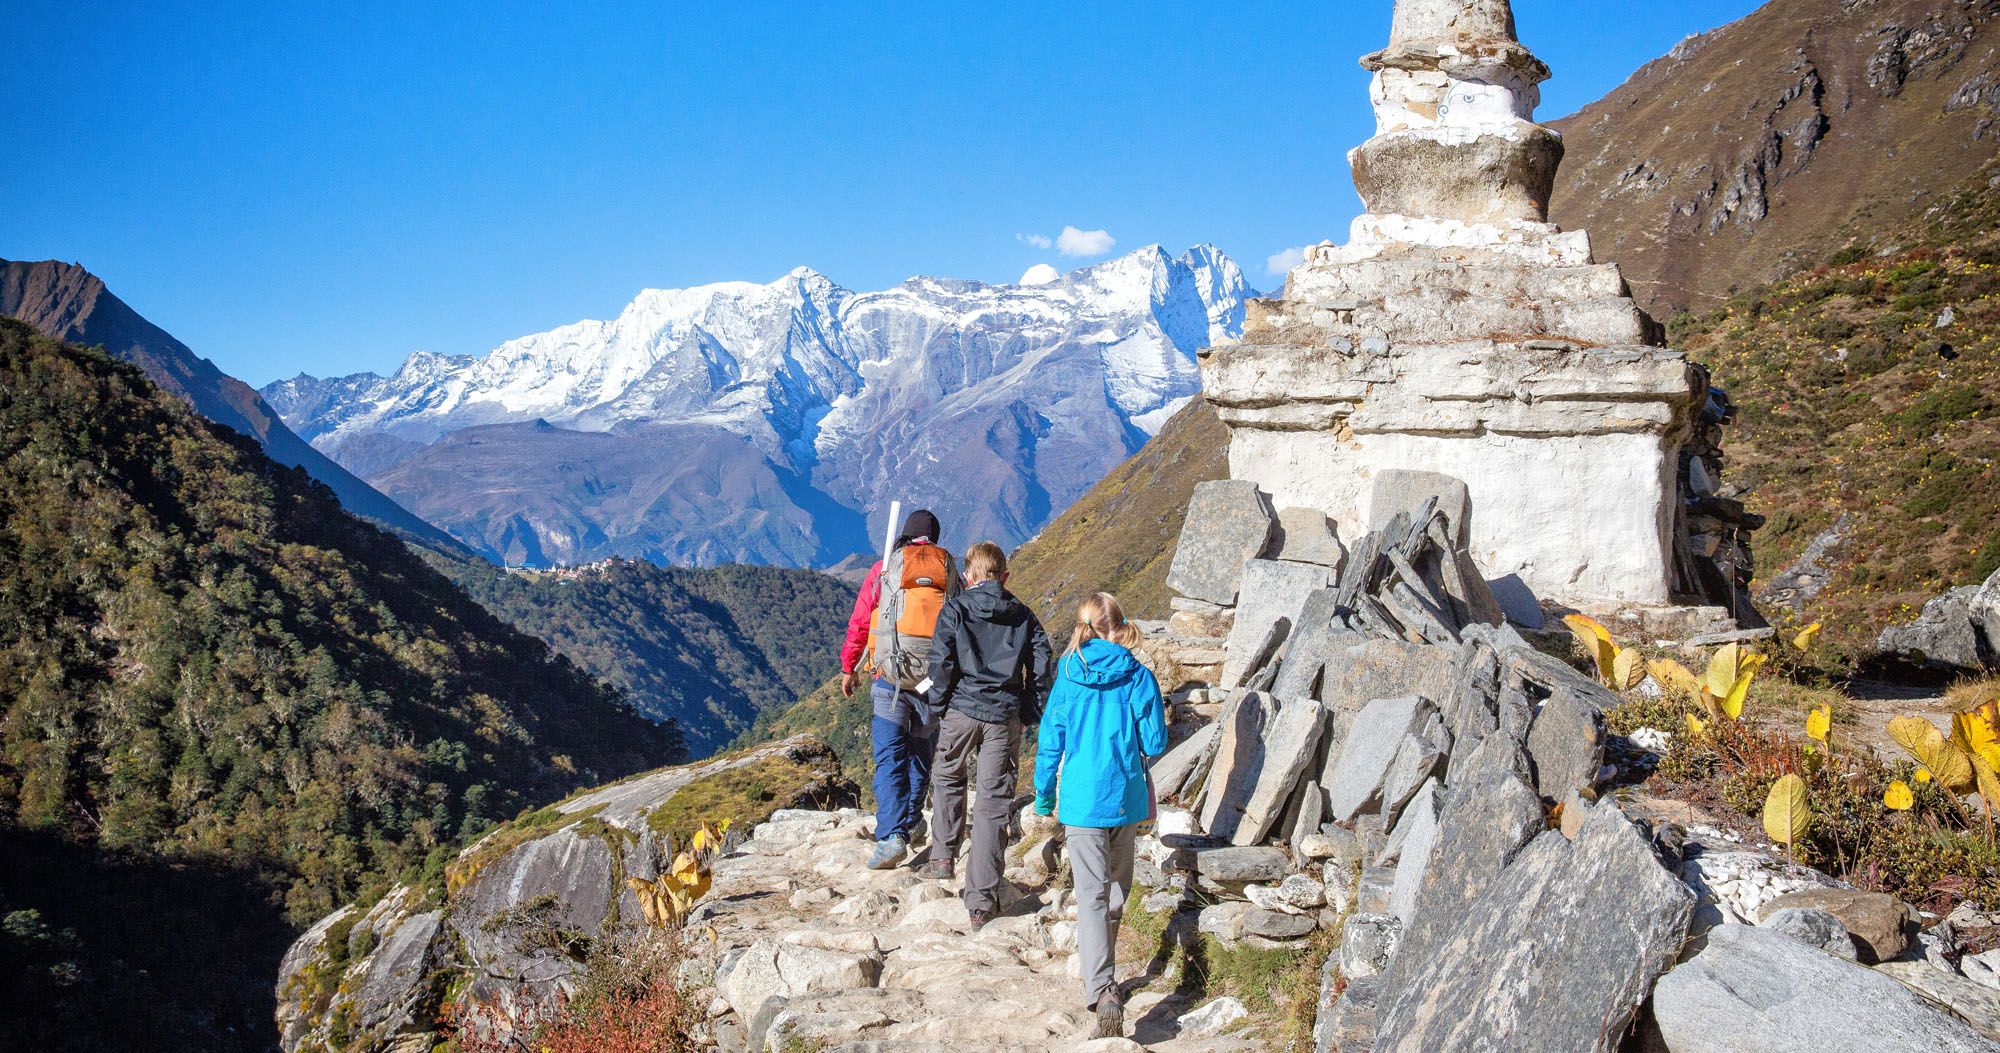 Featured image for “Trekking to Everest Base Camp with Kids”